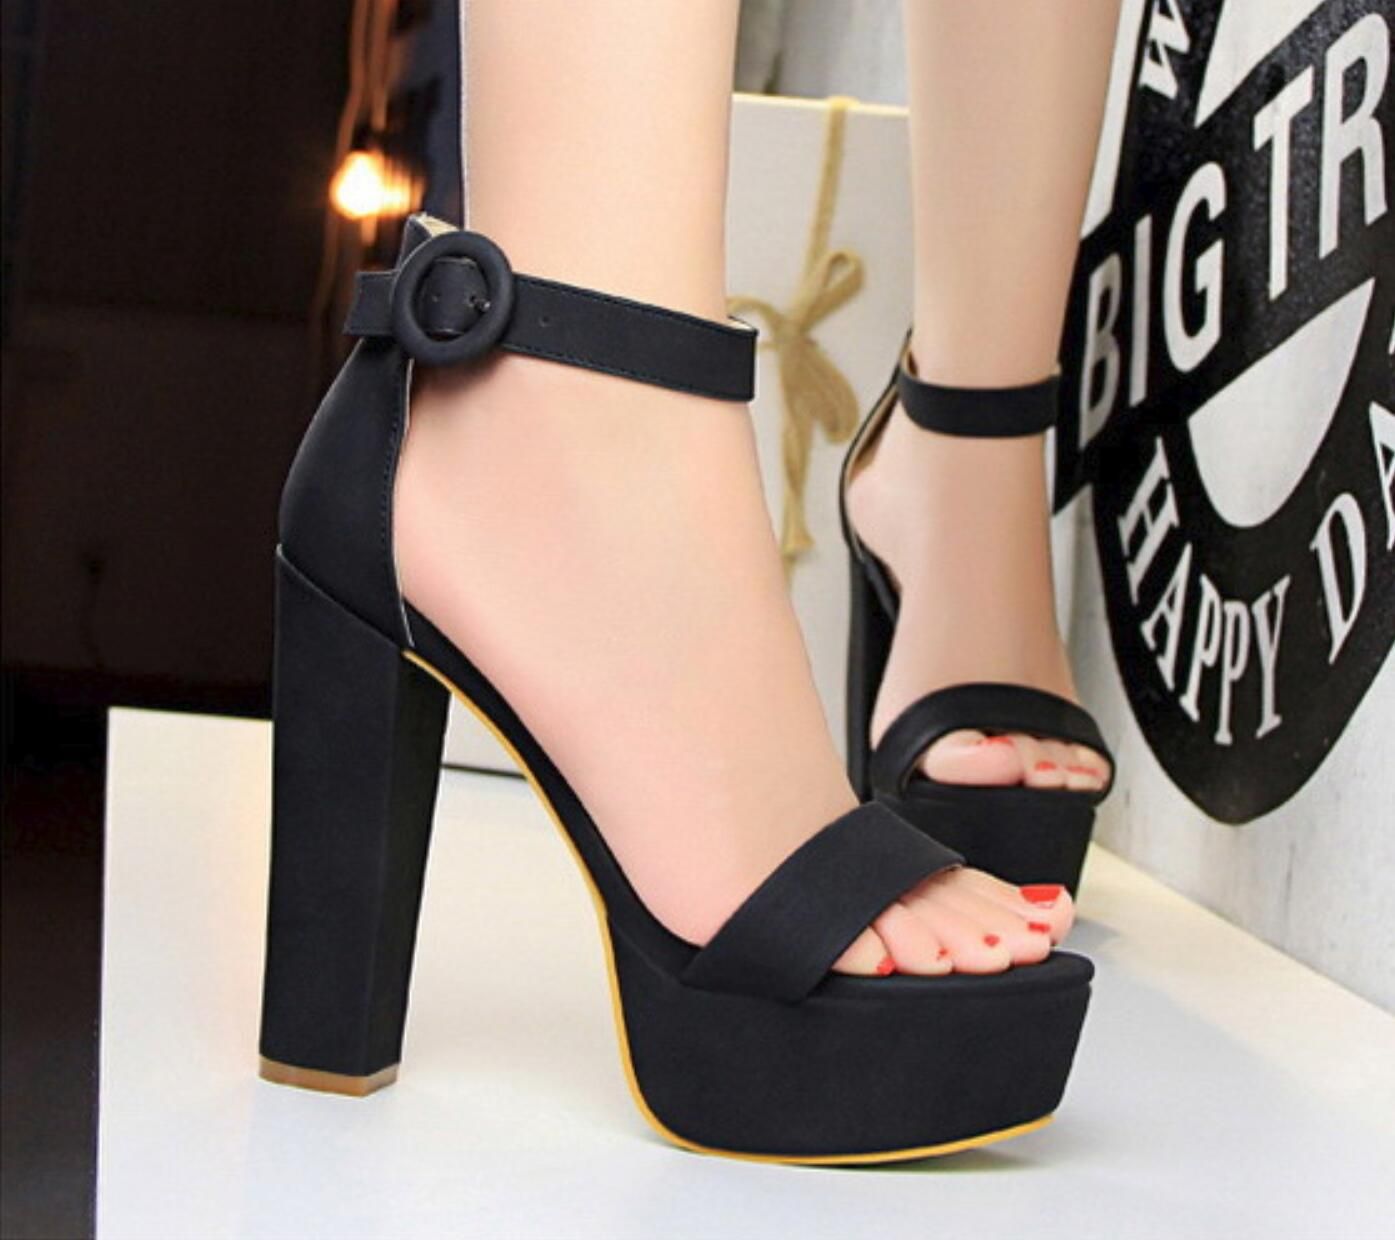 Ladies Platform Block heel Sandals Party High Heels Ankle strap Strappy Shoes